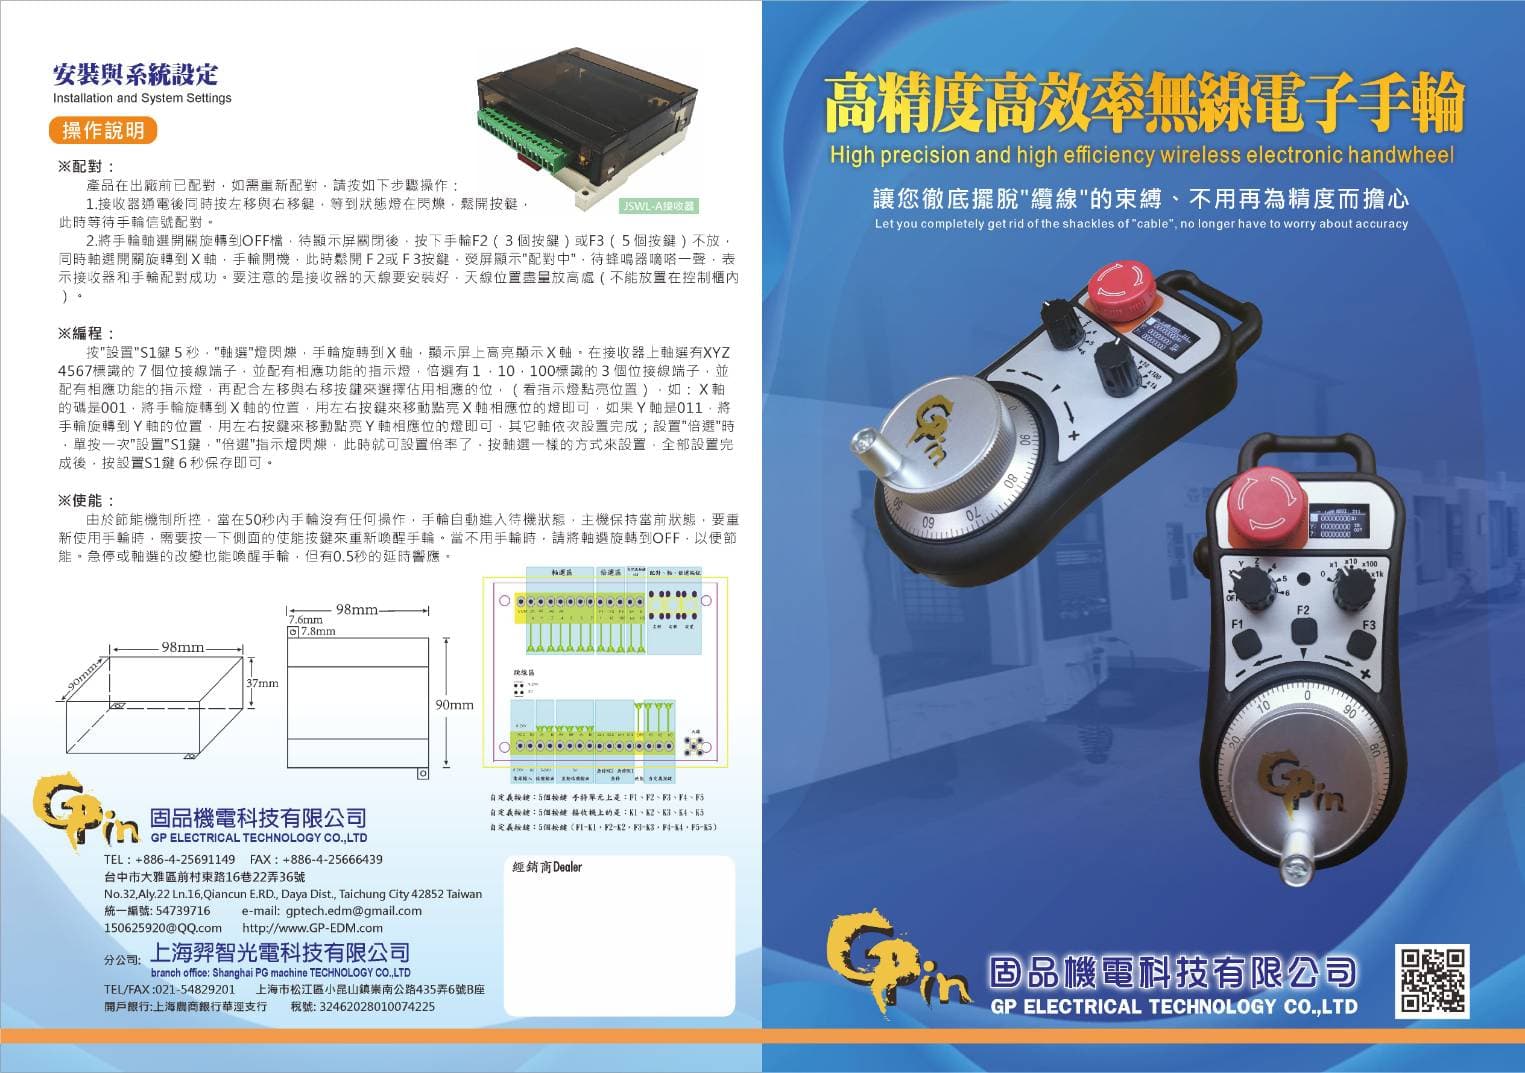 High precision and high efficiency wireless electronic handw